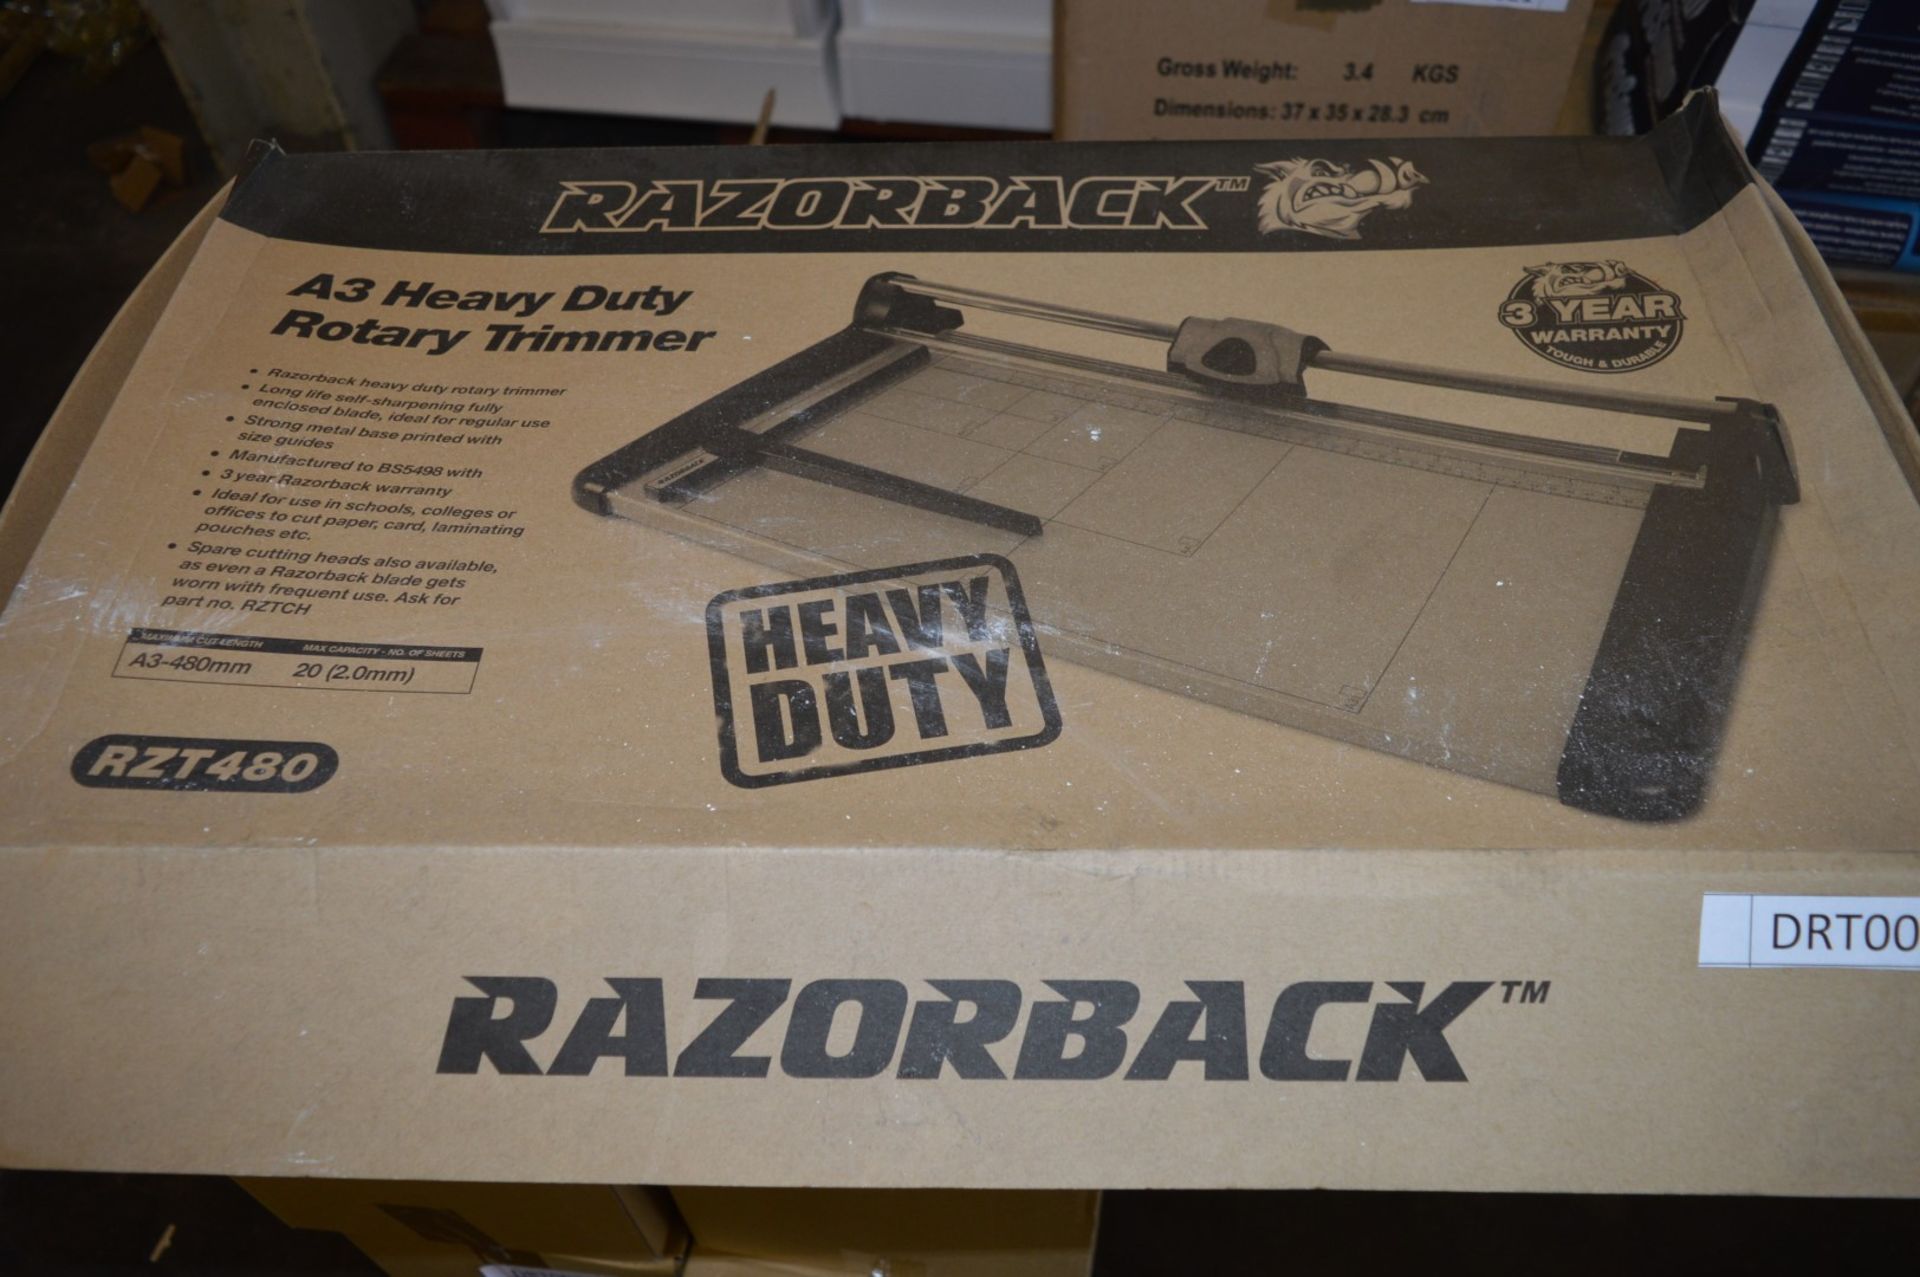 1 x Razorback A3 Heavy Duty Rotary Paper Trimmer - Unused in Original Box - Self Sharpening - Strong - Image 7 of 7